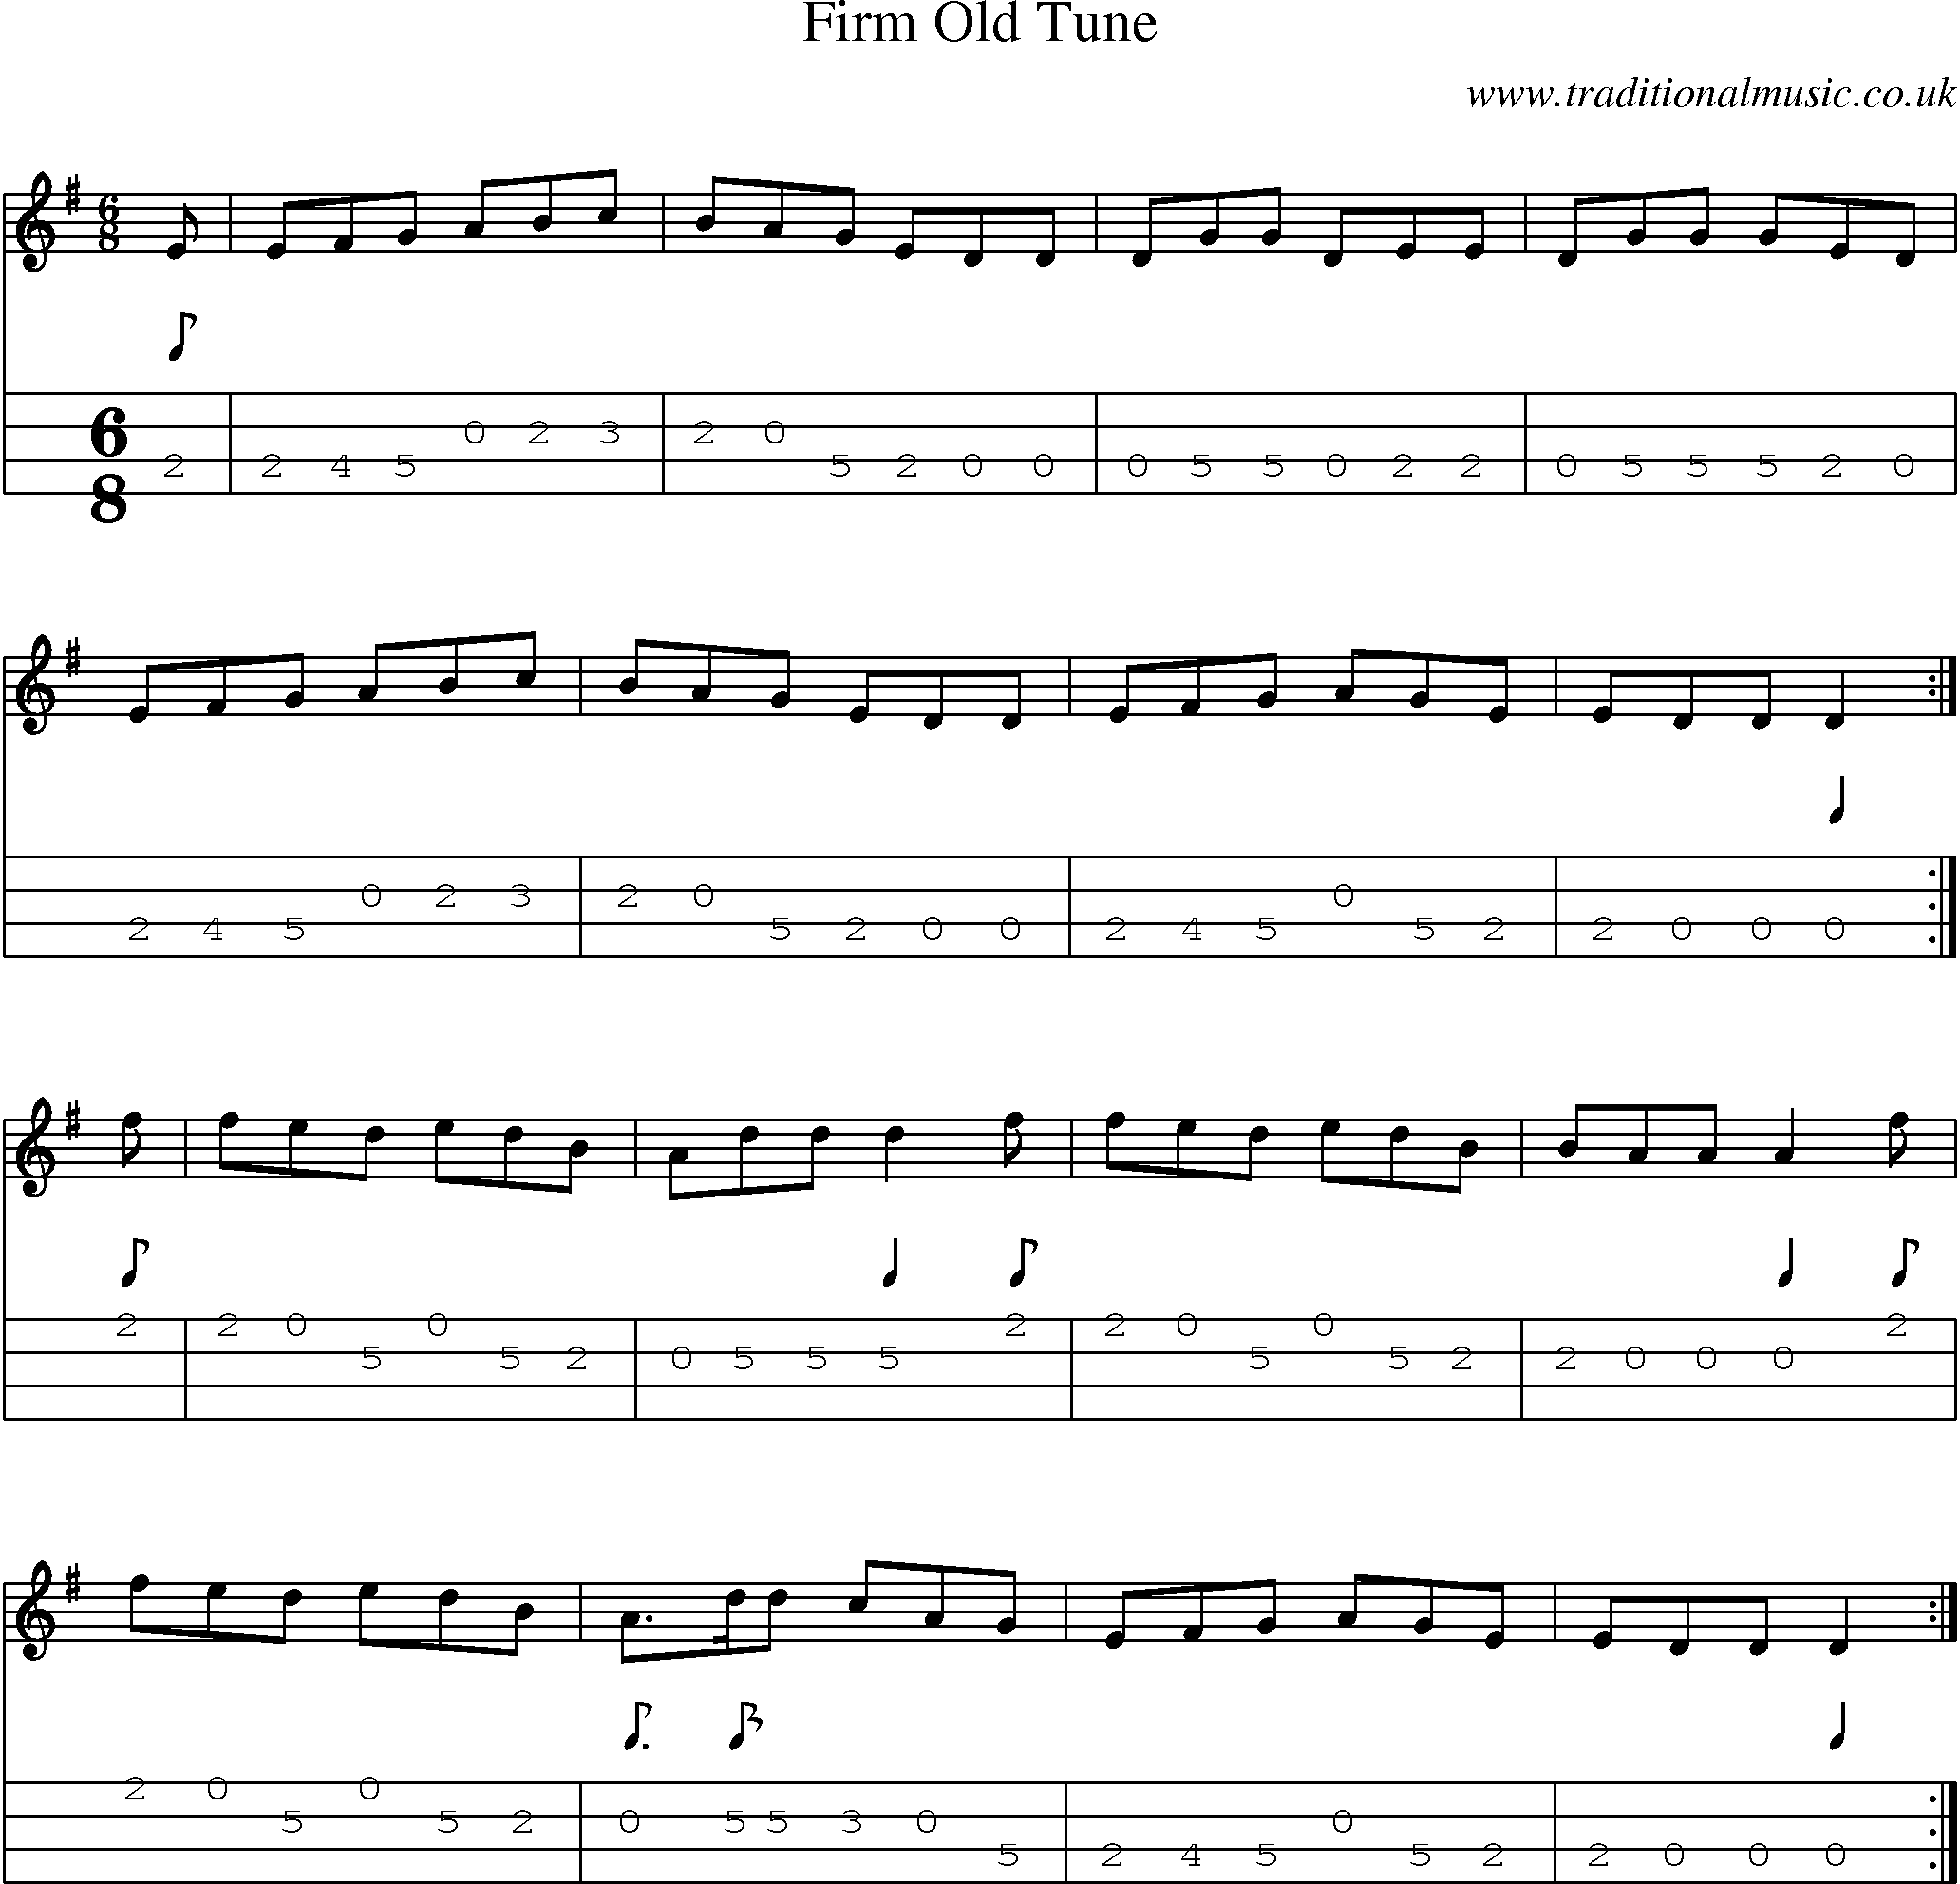 Music Score and Mandolin Tabs for Firm Old Tune